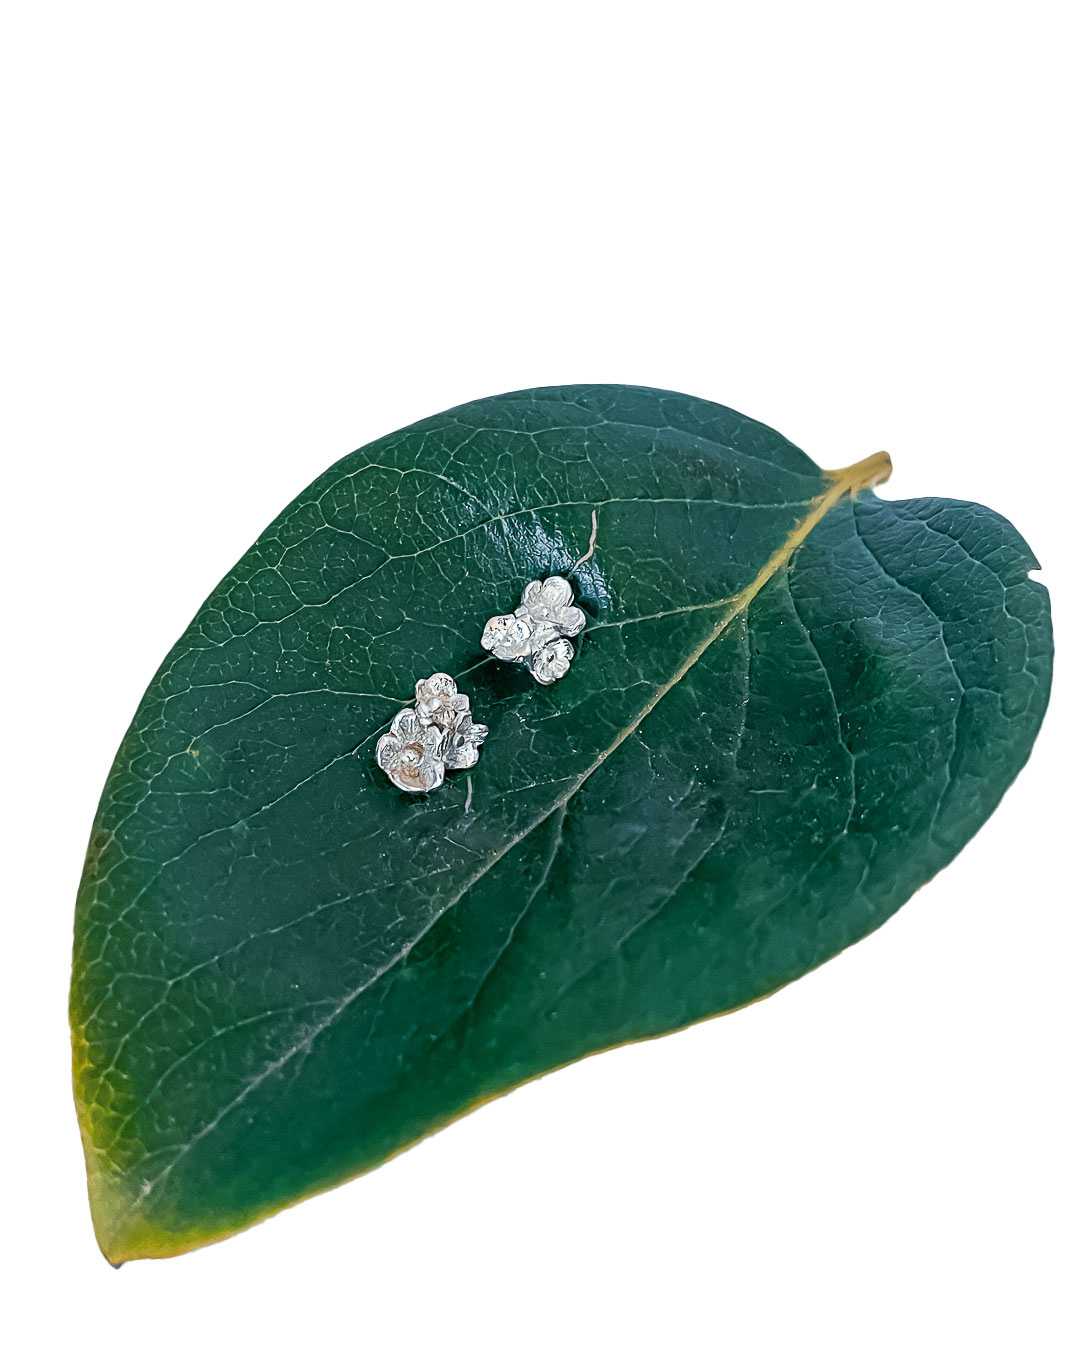 A pair of Sterling Silver Flower bouquet Stud Earrings  shown against a Pomegranite Leaf